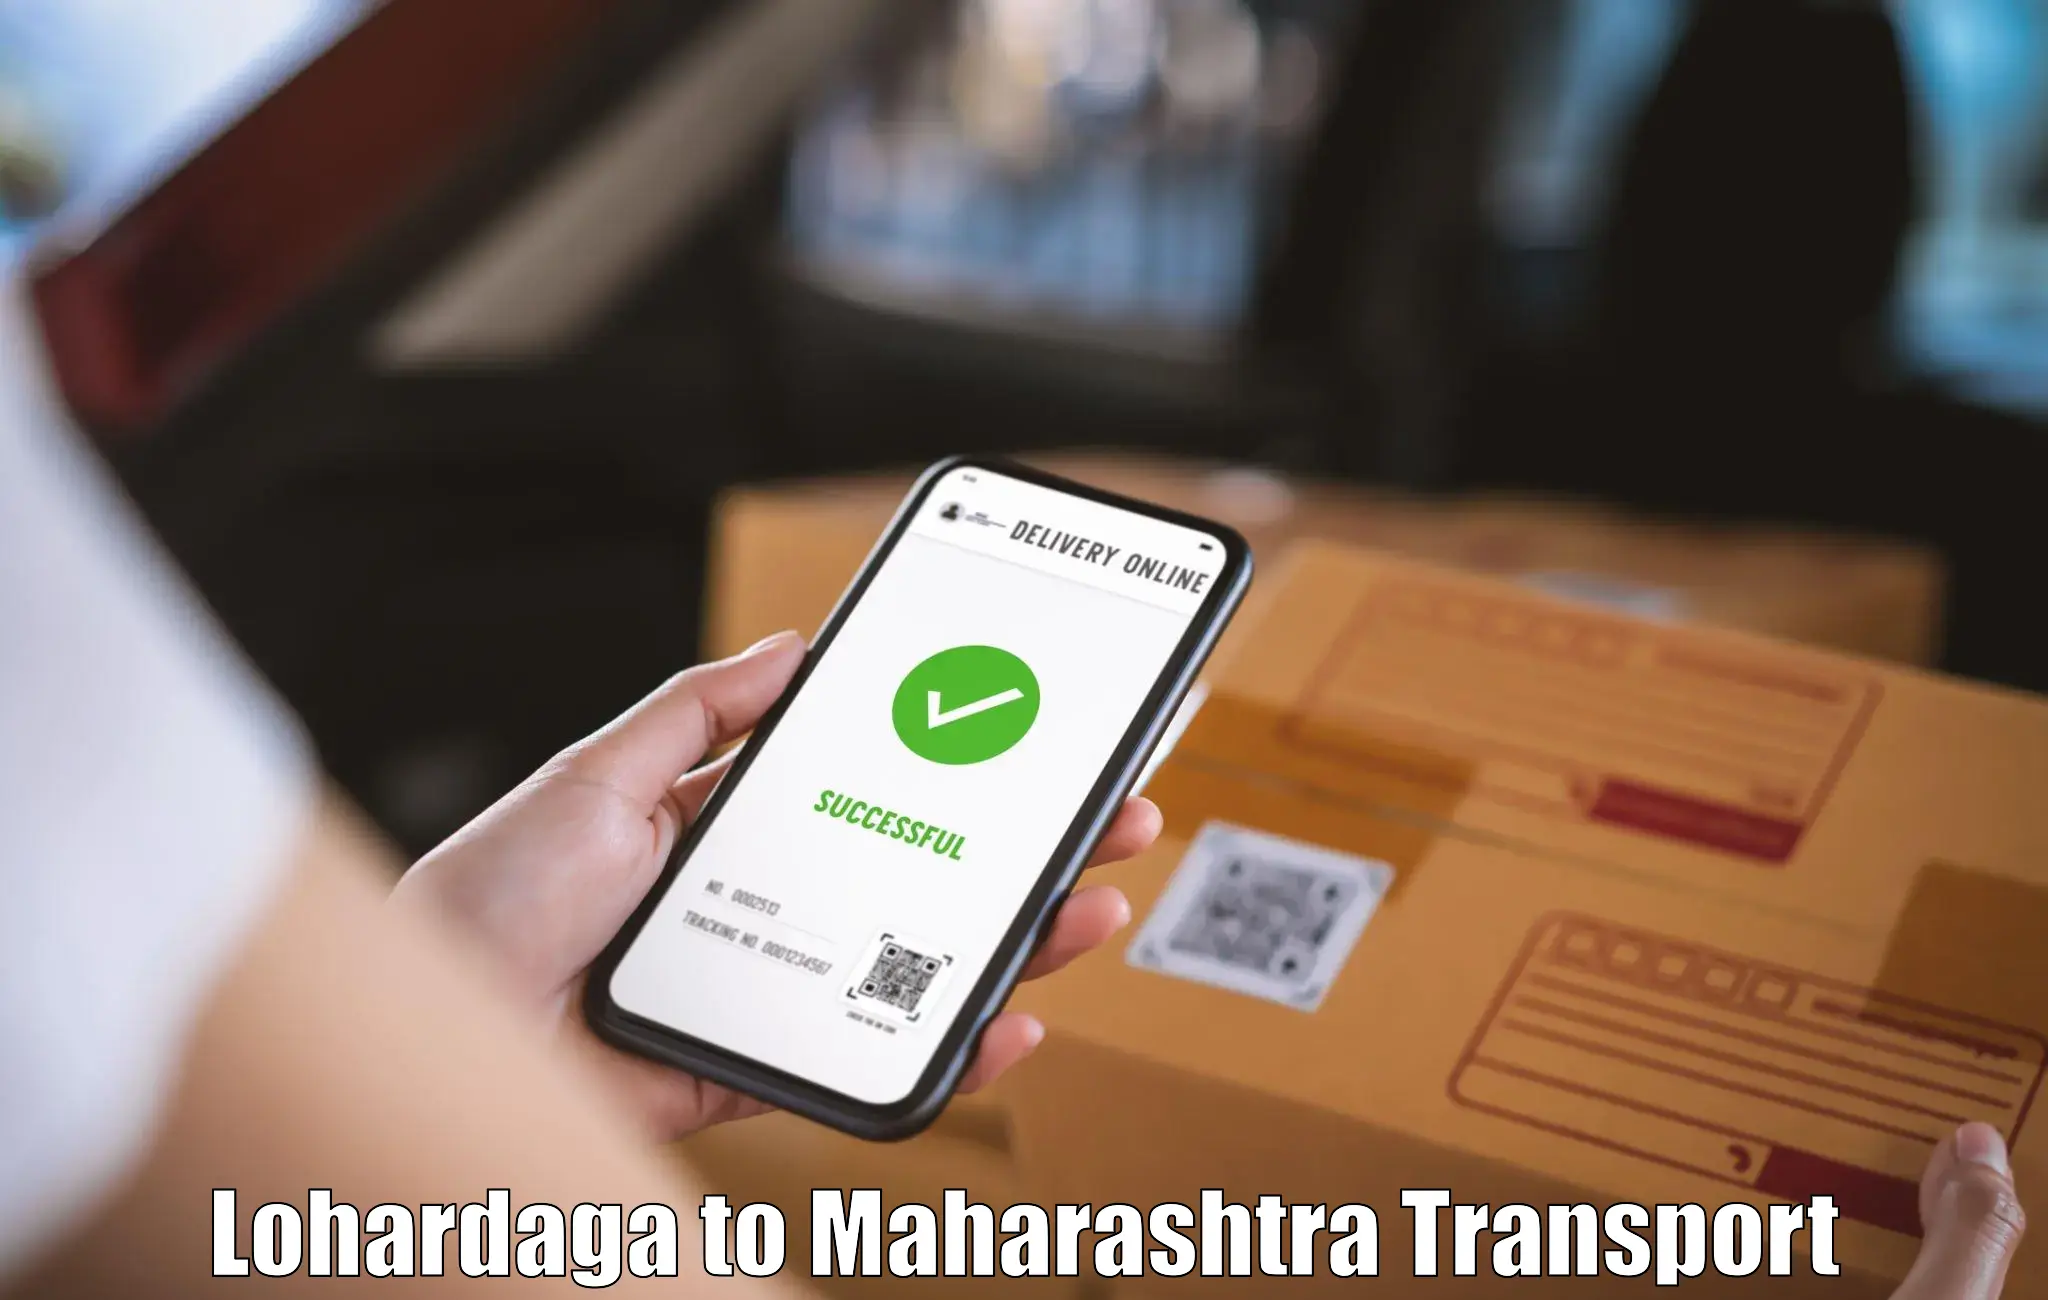 Air freight transport services in Lohardaga to Osmanabad